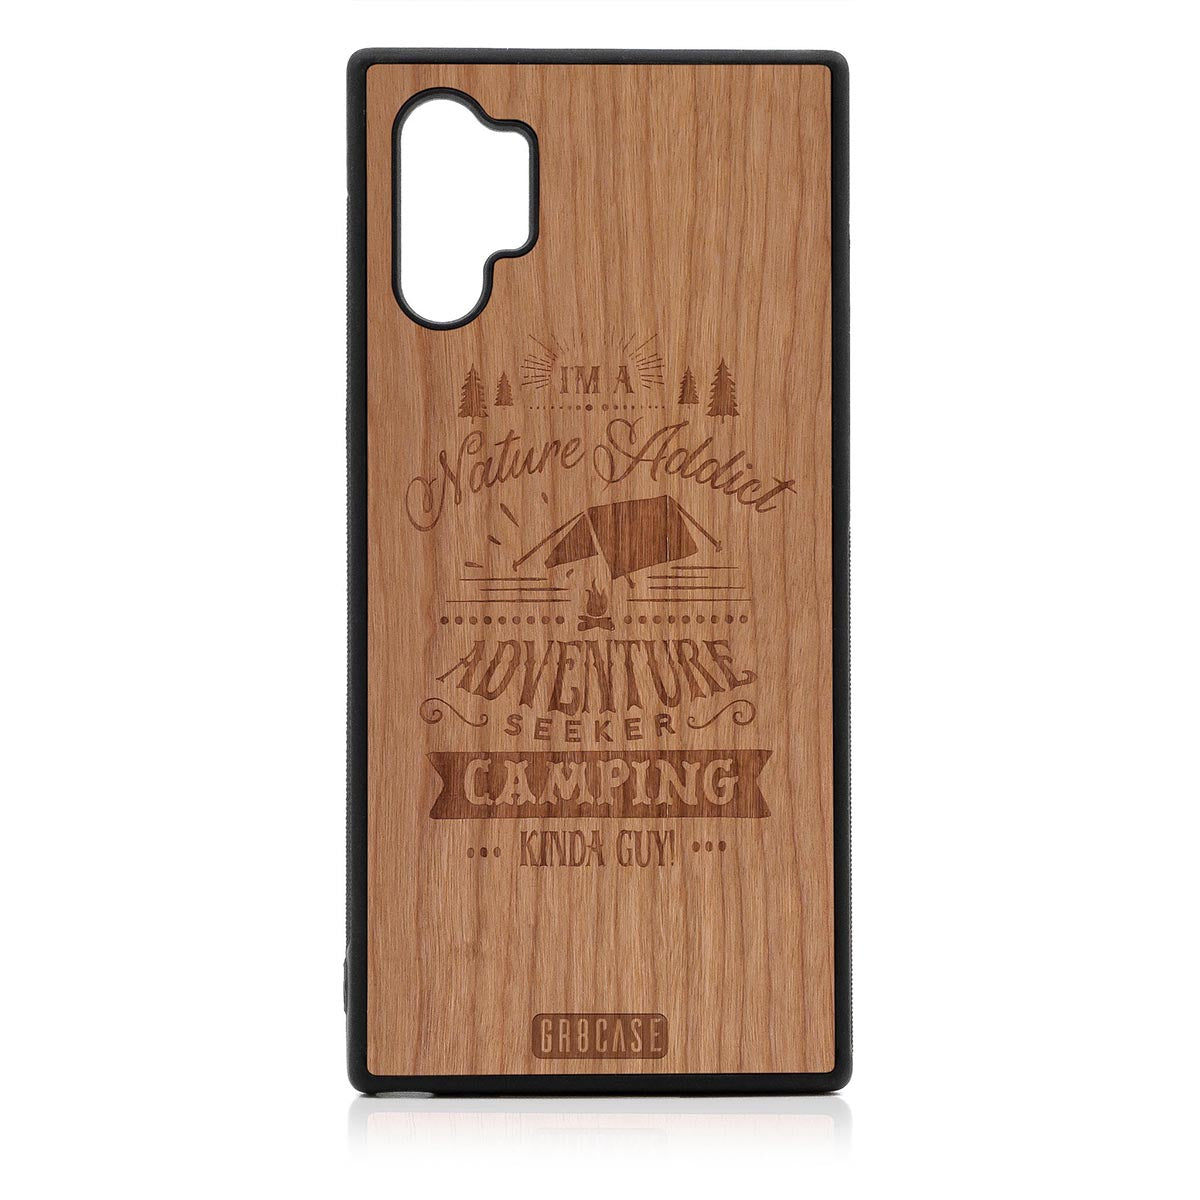 I'm A Nature Addict Adventure Seeker Camping Kinda Guy Design Wood Case Samsung Galaxy Note 10 Plus by GR8CASE